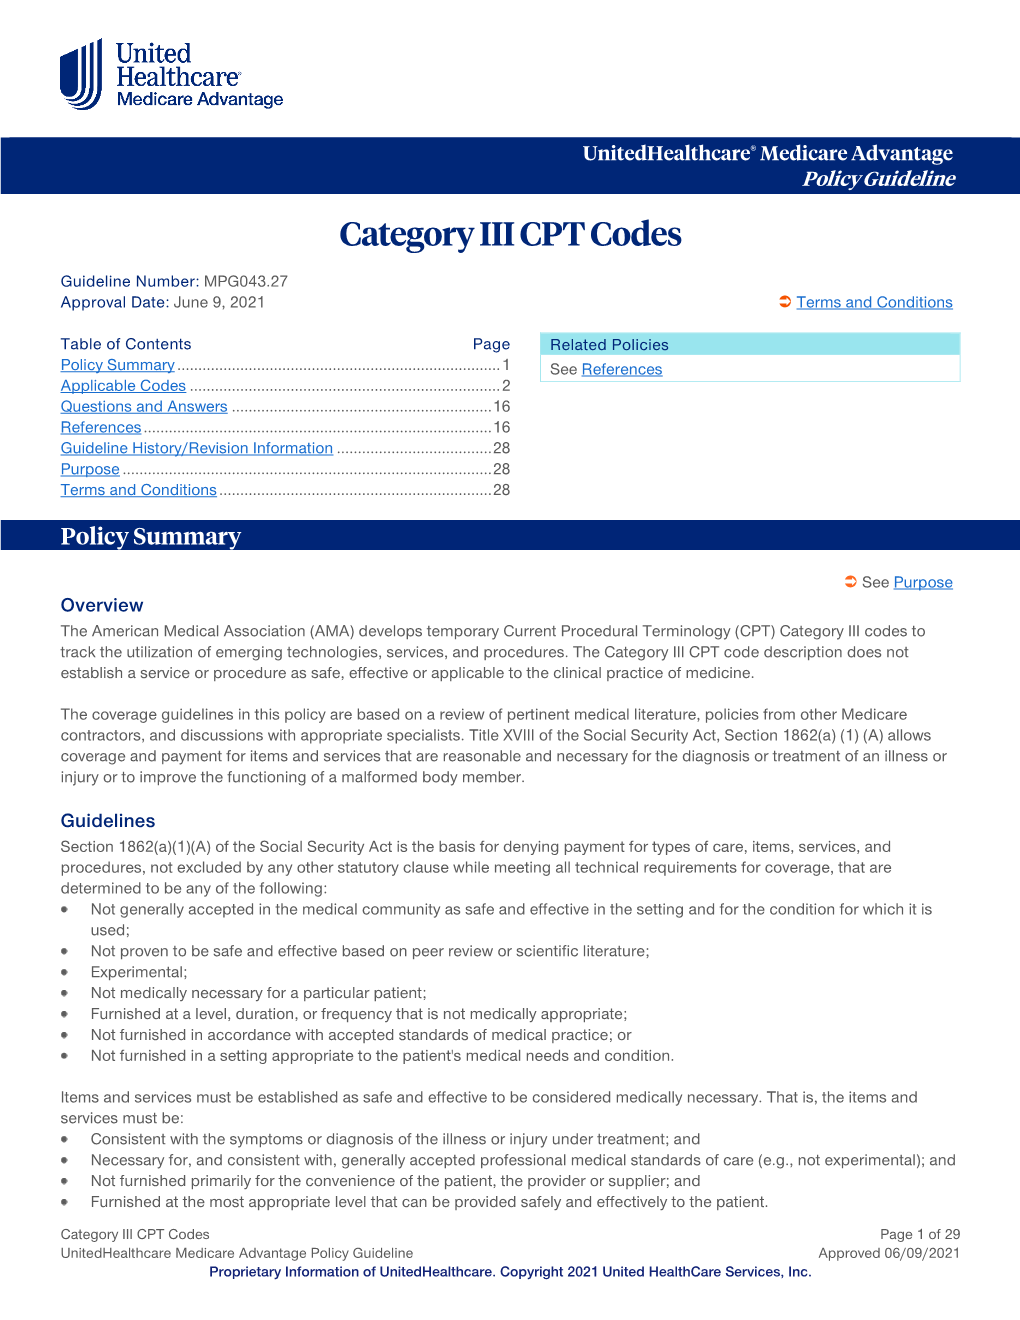 Category III CPT Codes – Medicare Advantage Policy Guideline